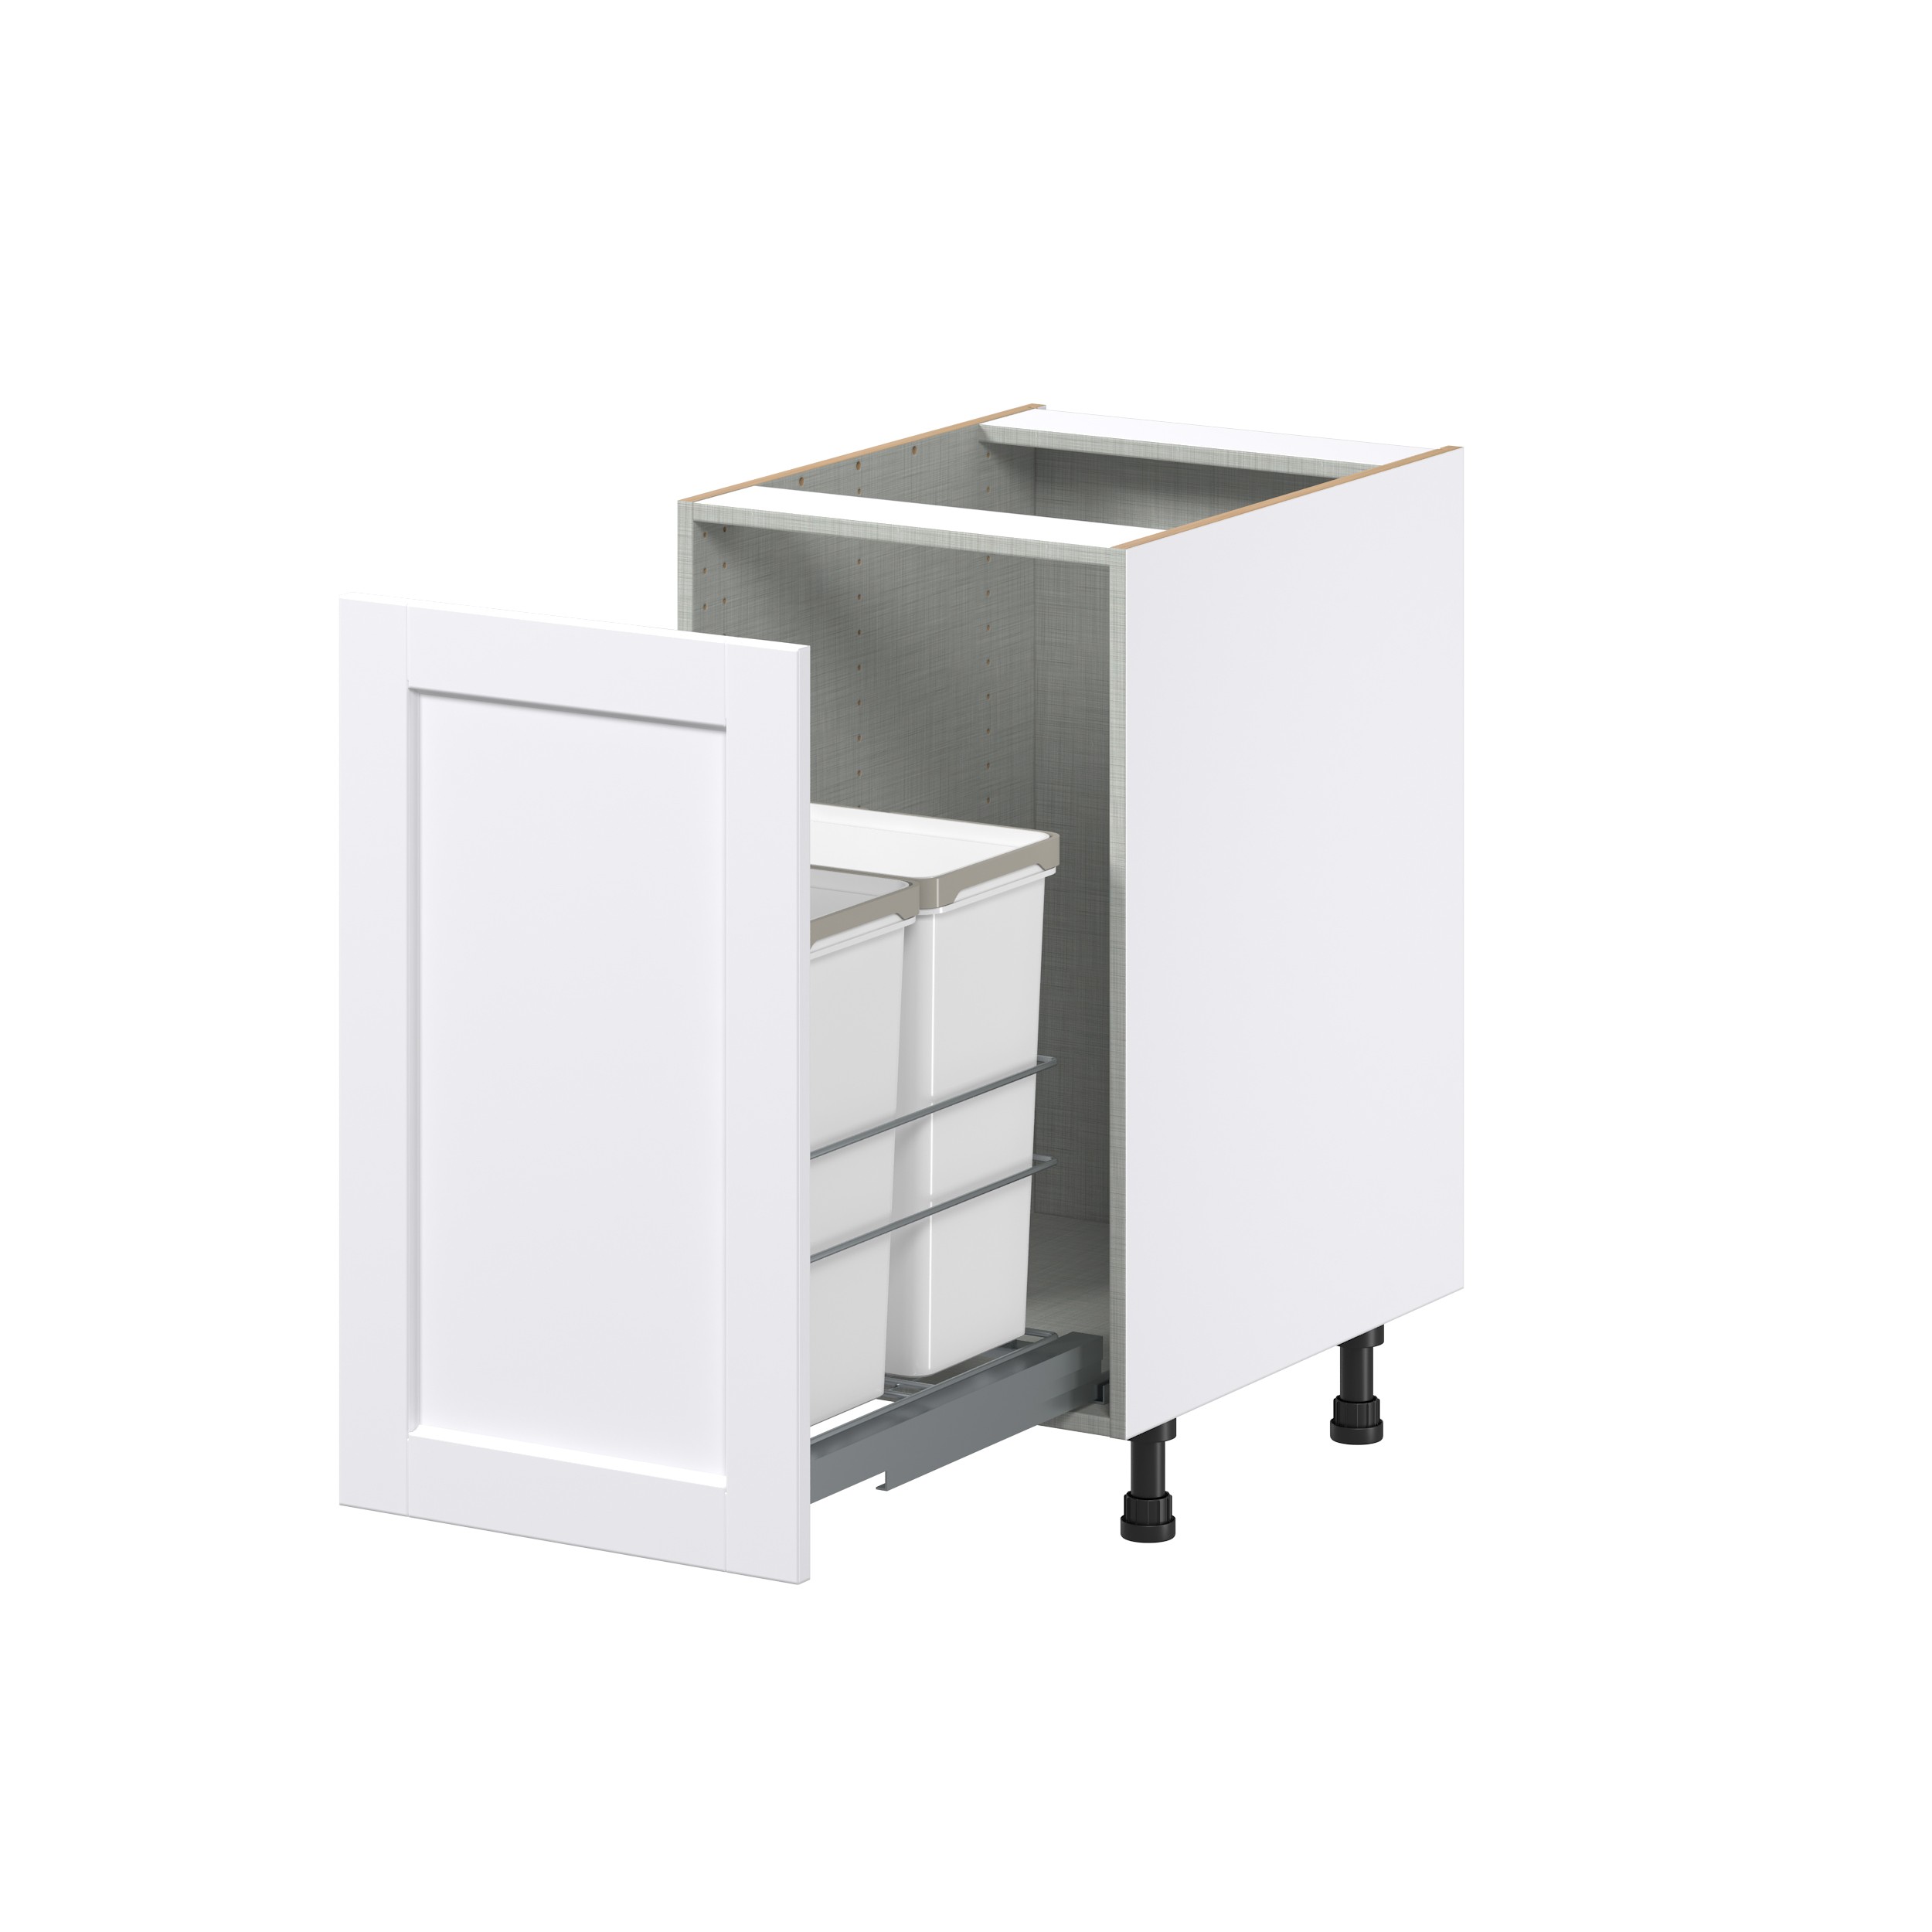 Dahlia Bright White Shaker Assembled Full High Door with 2 Pull Out Waste Bin Kitchen Cabinet (18 in. W x 34.5 in. H x 24 in. D)